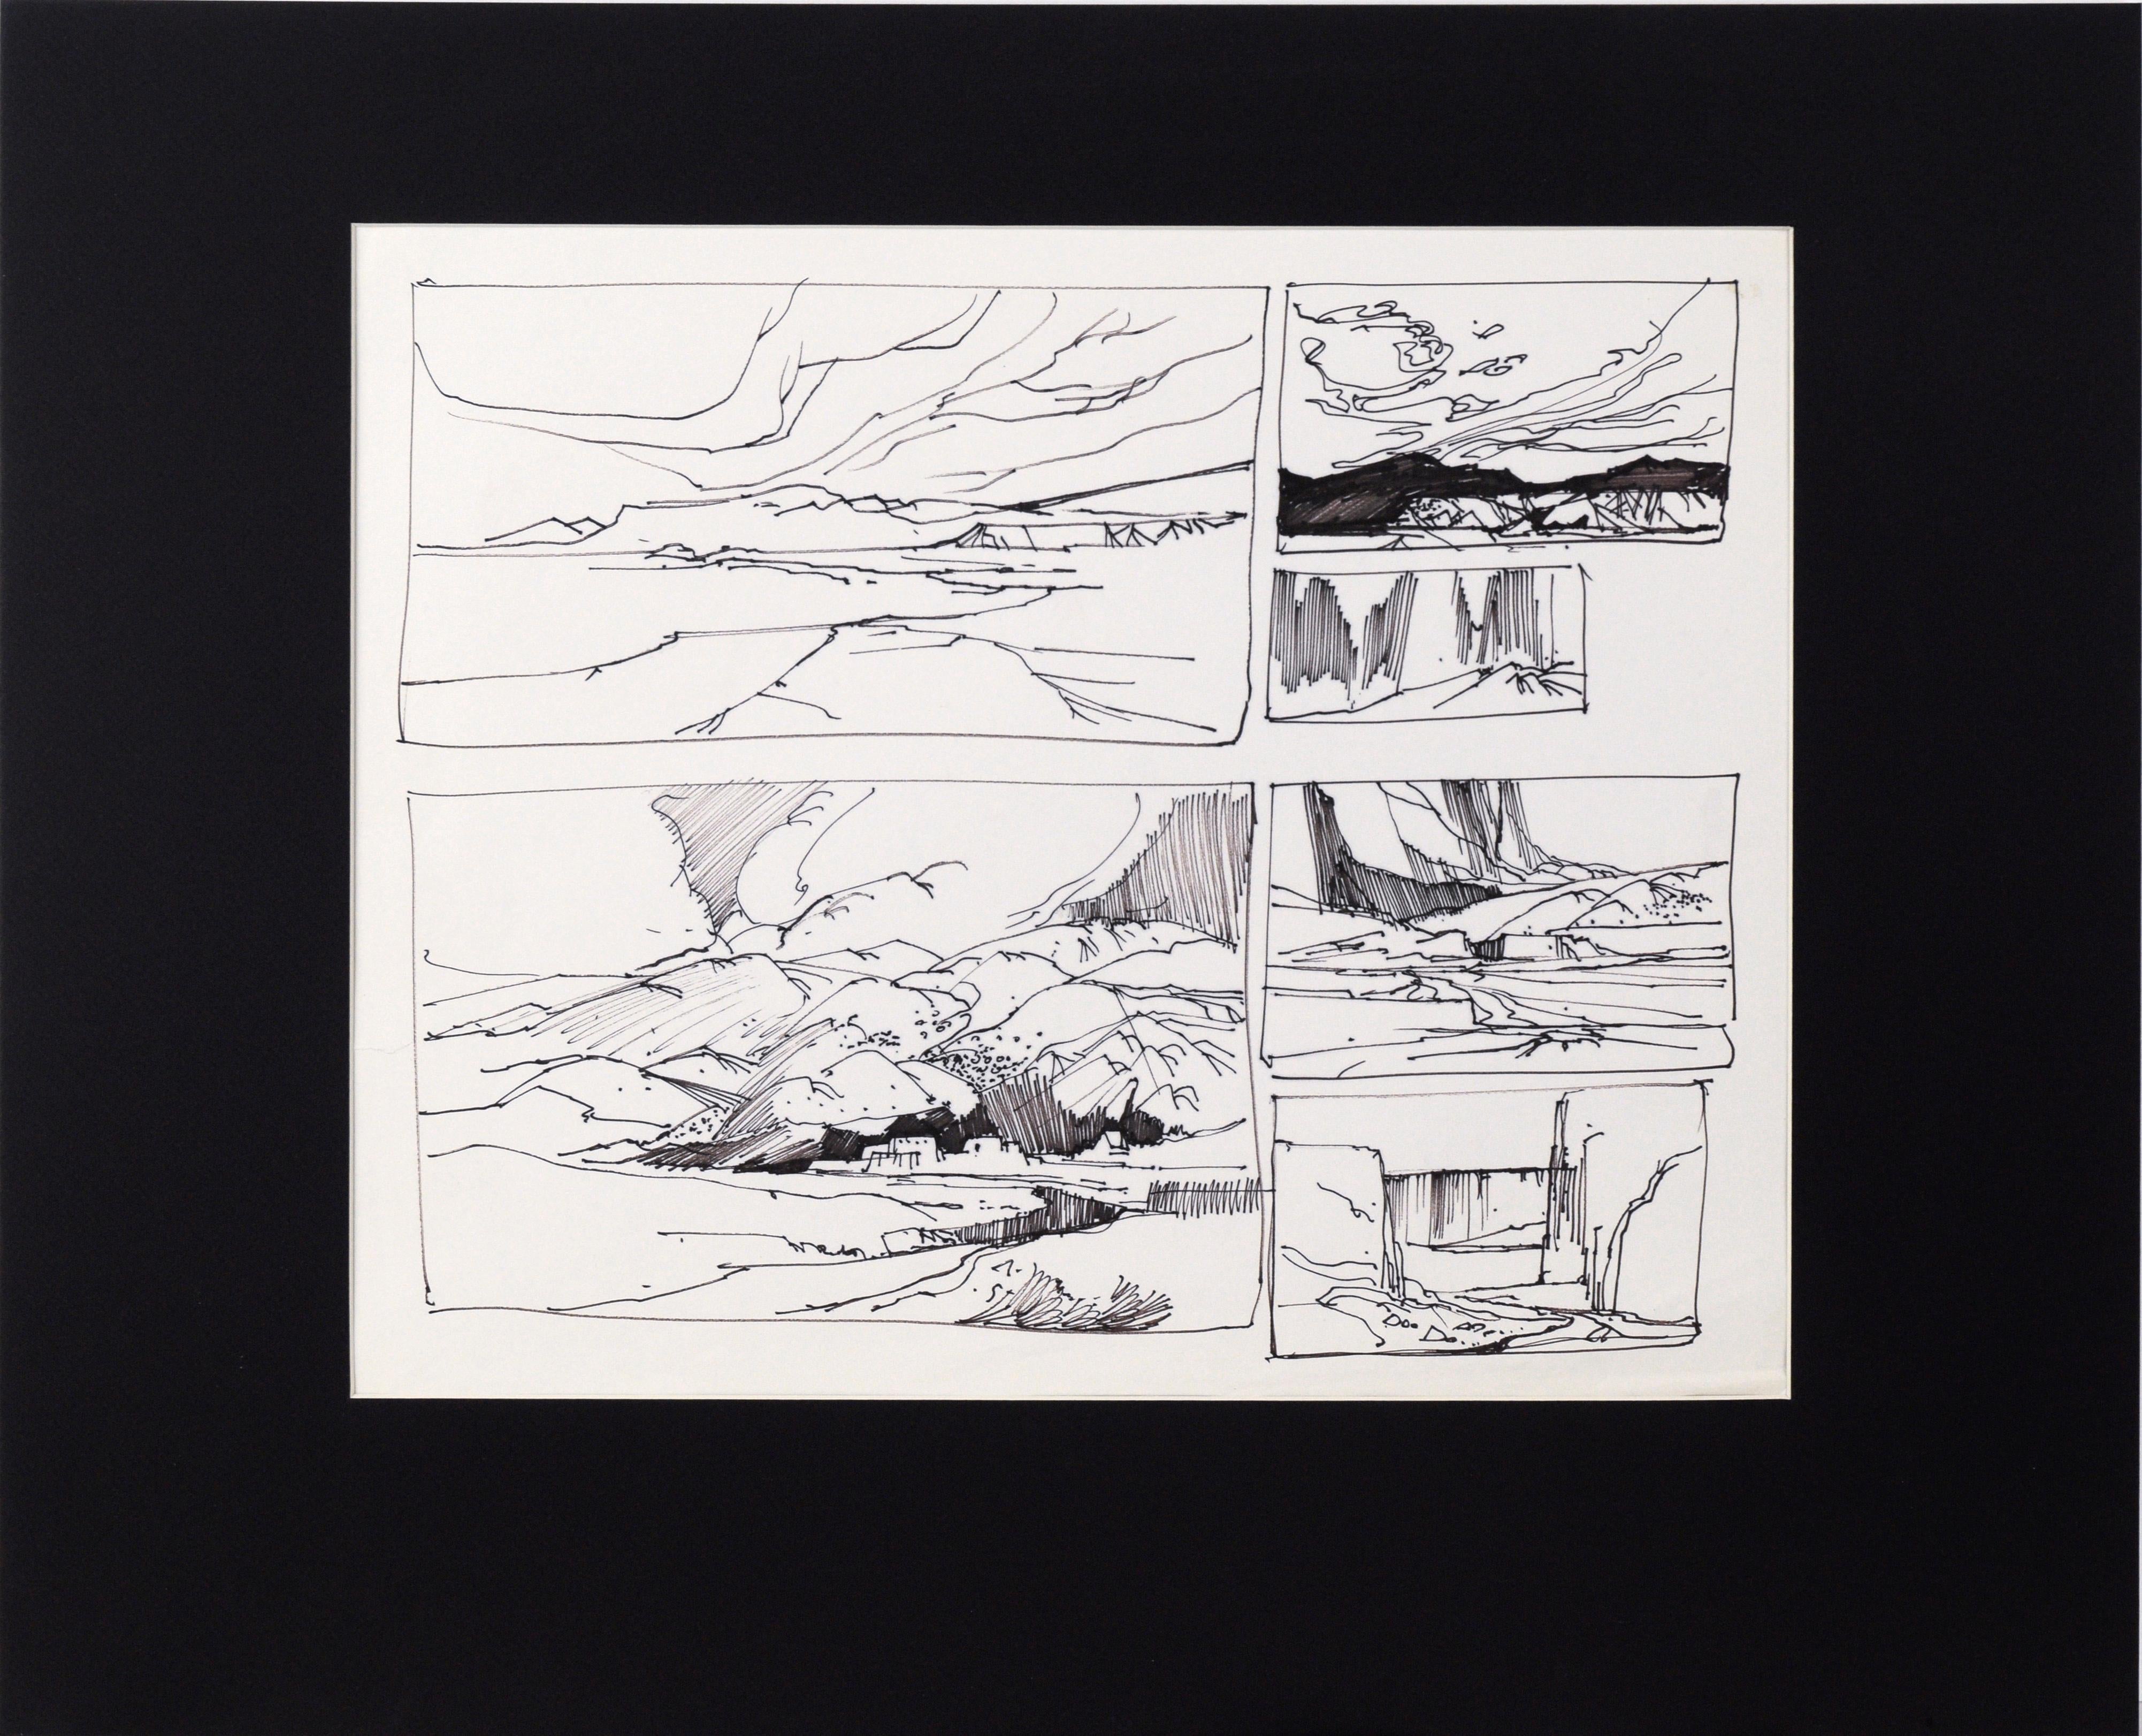 Laurence Sisson Landscape Art - Six Panel Thumbnail Sketches of Desert and Canyon Landscapes in Ink on Paper